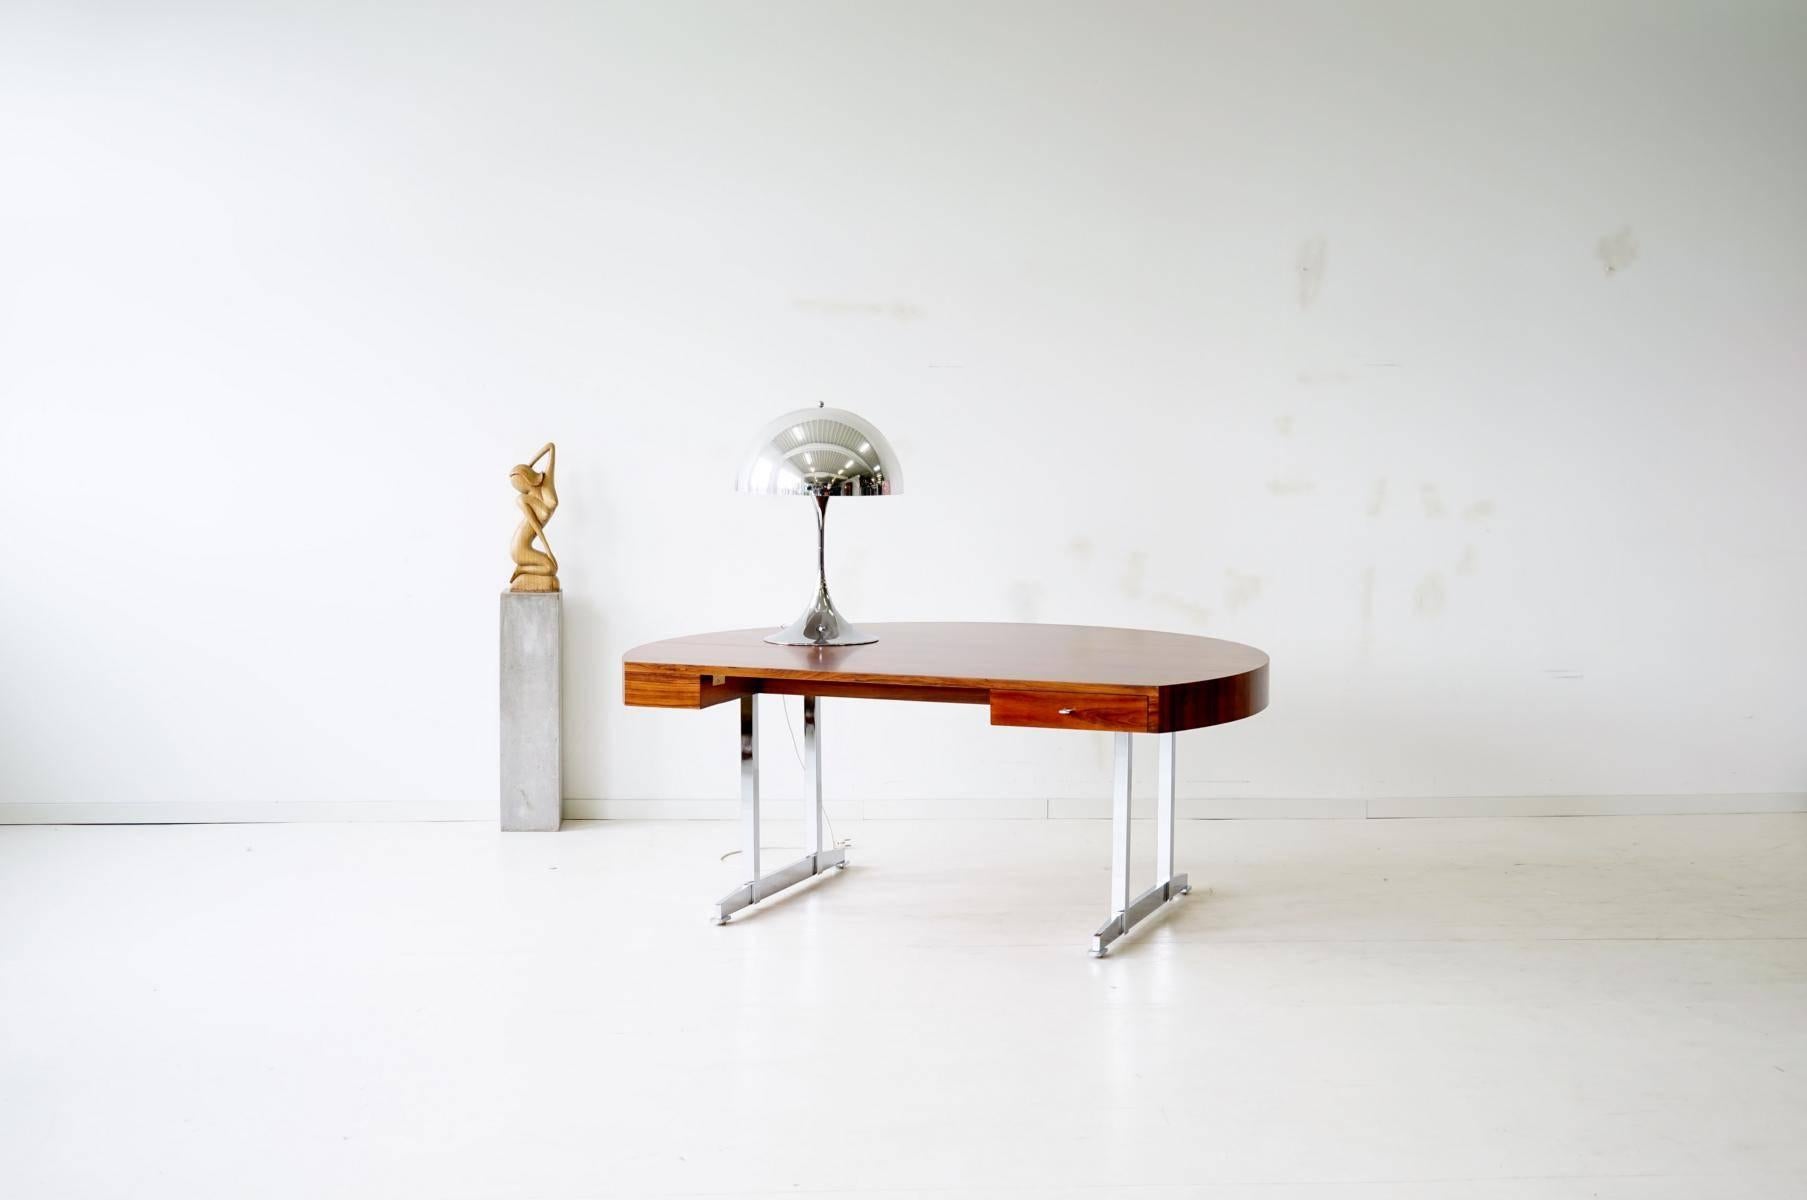 luxury executive desk table Scandinavian Modern, midcentury
Extremely rare, rounded desk. This high-quality desk is equipped with a drawer on the right. The large, rounded table is supported by two chrome-plated metal legs, creating an open look.